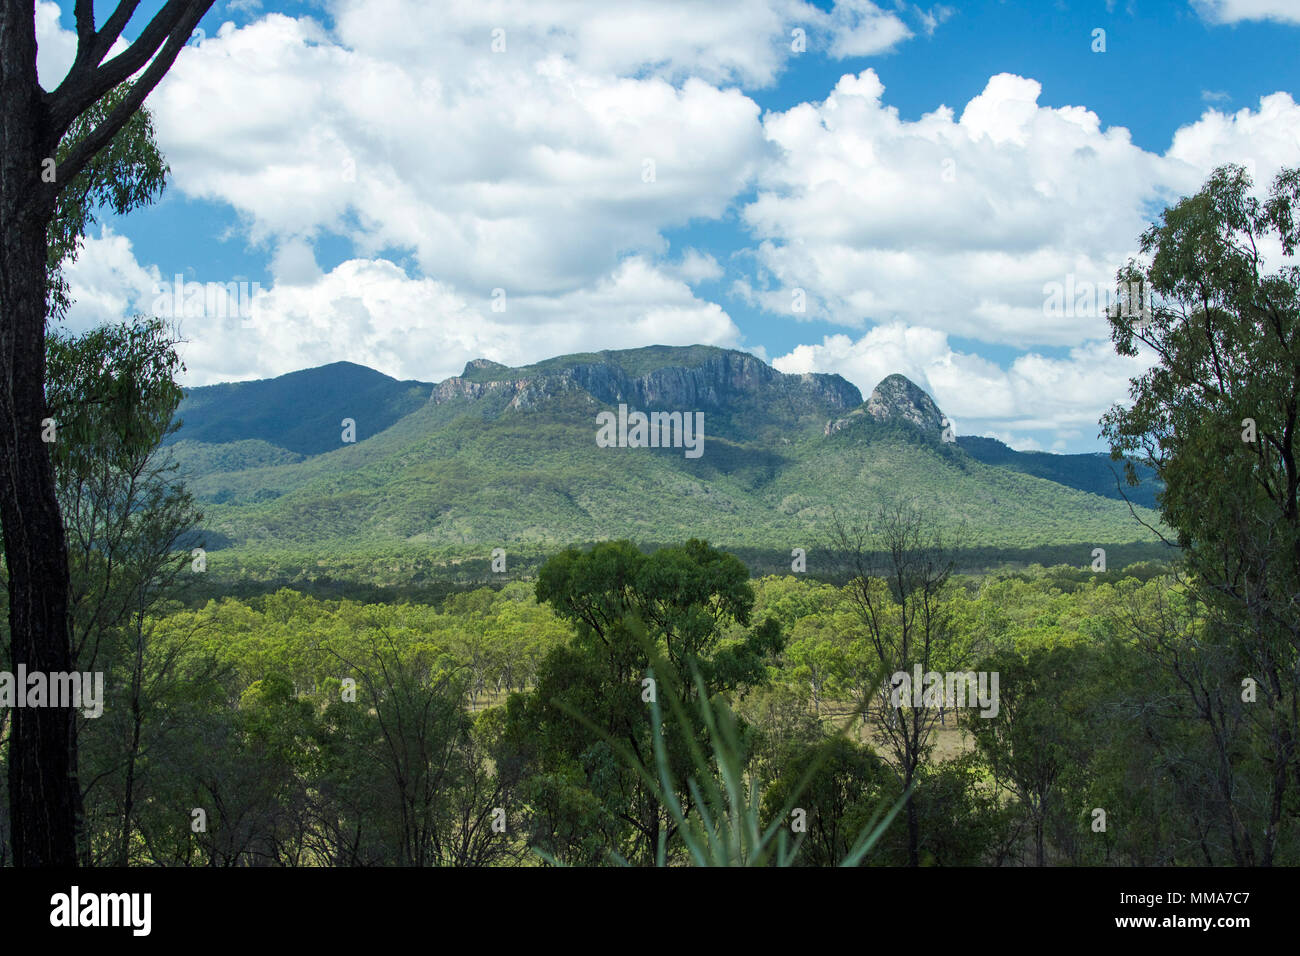 Vast landscape with rugged forested mountains of Great Dividing Range under blue sky at Homevale National Park, Central Queensland Australia Stock Photo